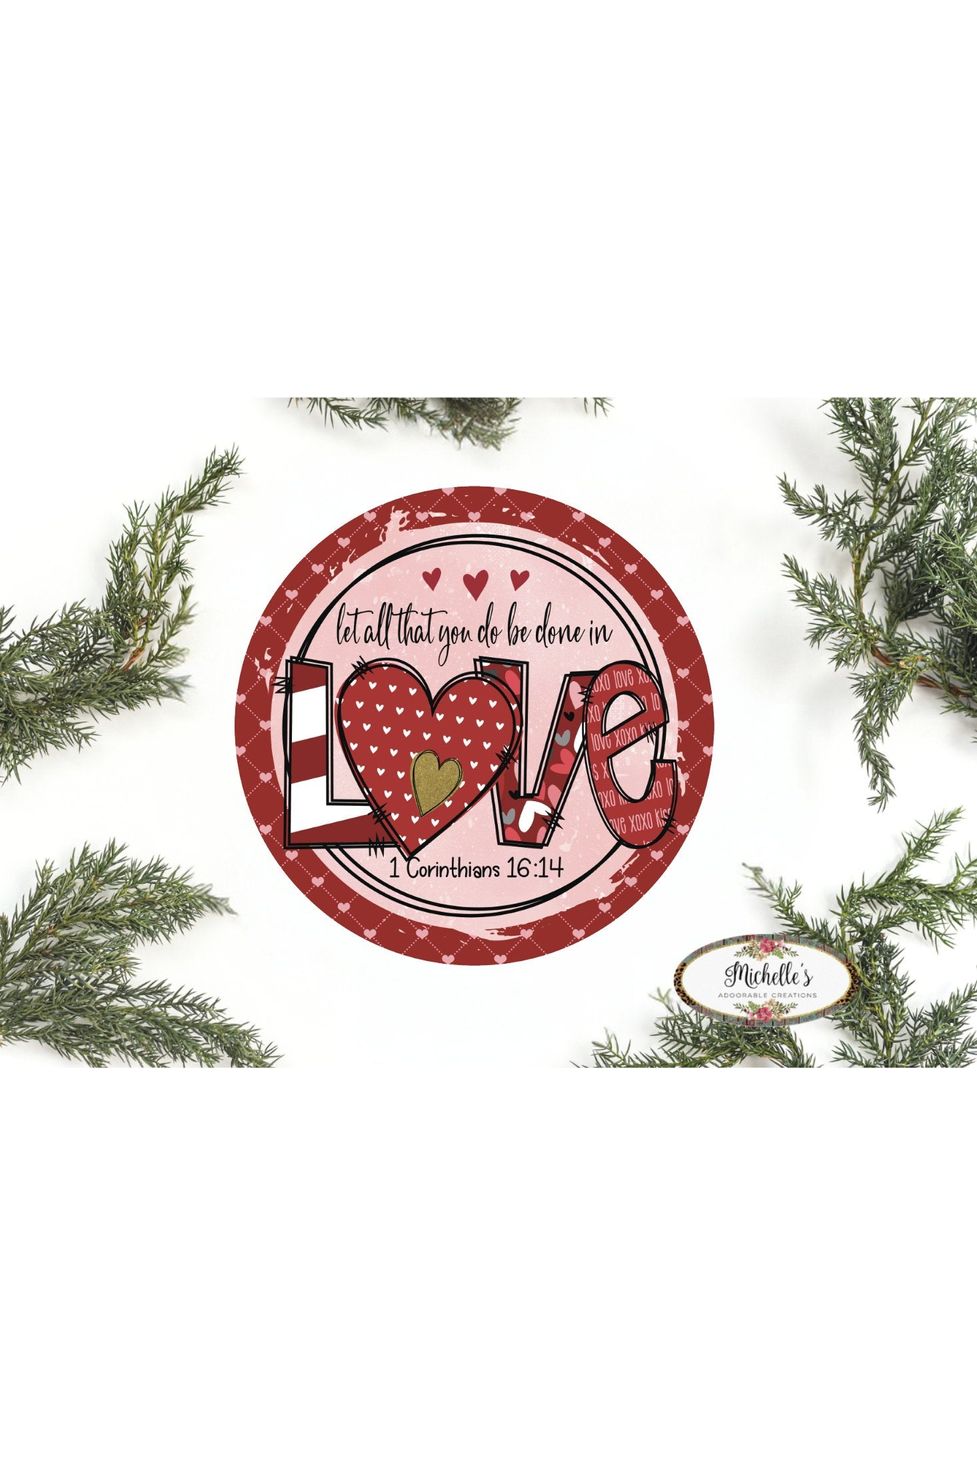 Be Done In Love Valentine Sign - Wreath Enhancement - Michelle's aDOORable Creations - Signature Signs